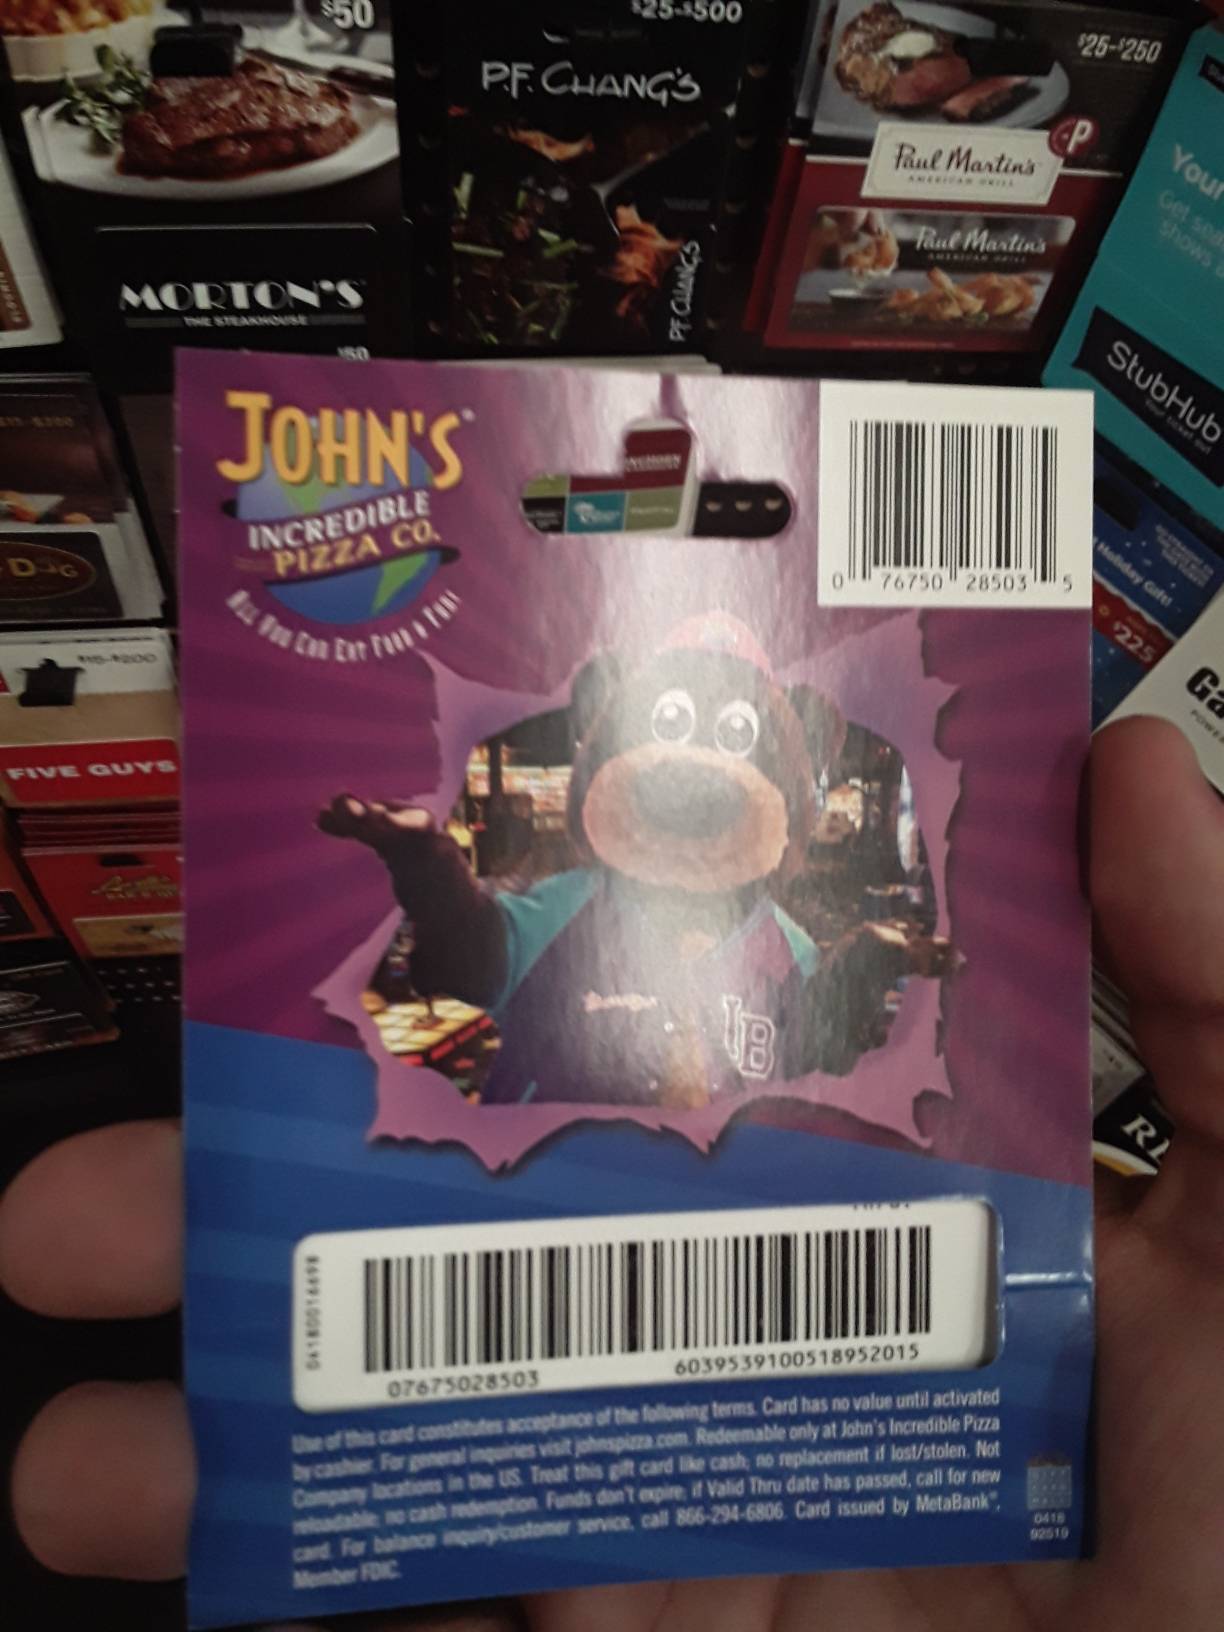 John S Incredible Pizza Co Gift Card At Food4less By Imorales914 On Deviantart